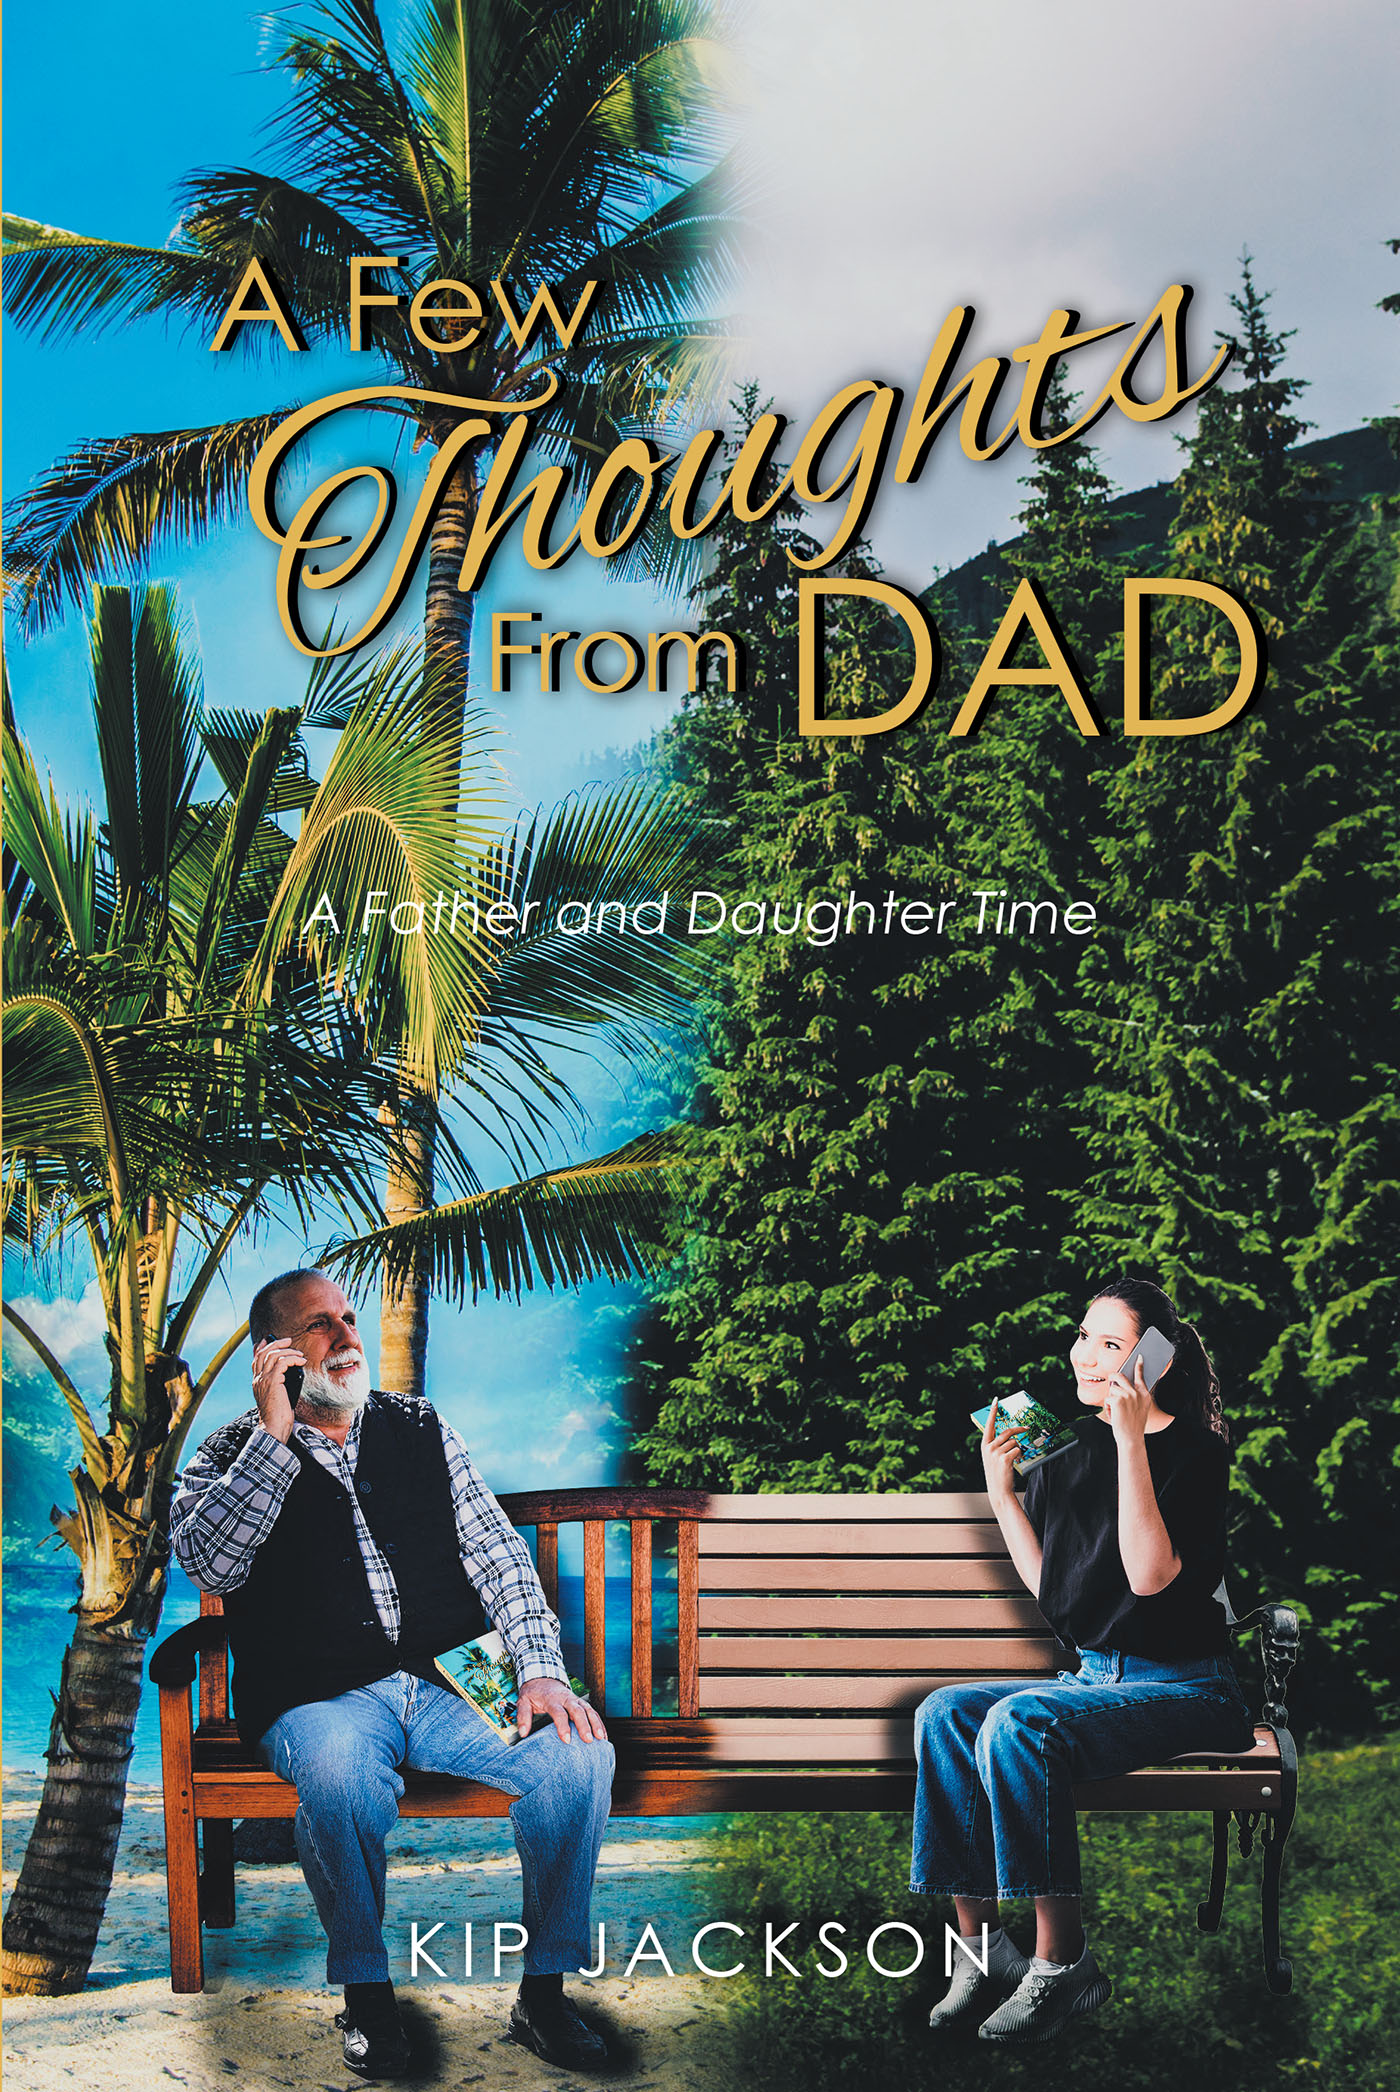 Kip Jackson’s Newly Released “A Few Thoughts From Dad: A Father and Daughter Time” is an Engaging Reflection on Parenting a Daughter in All Ages and Stages of Life